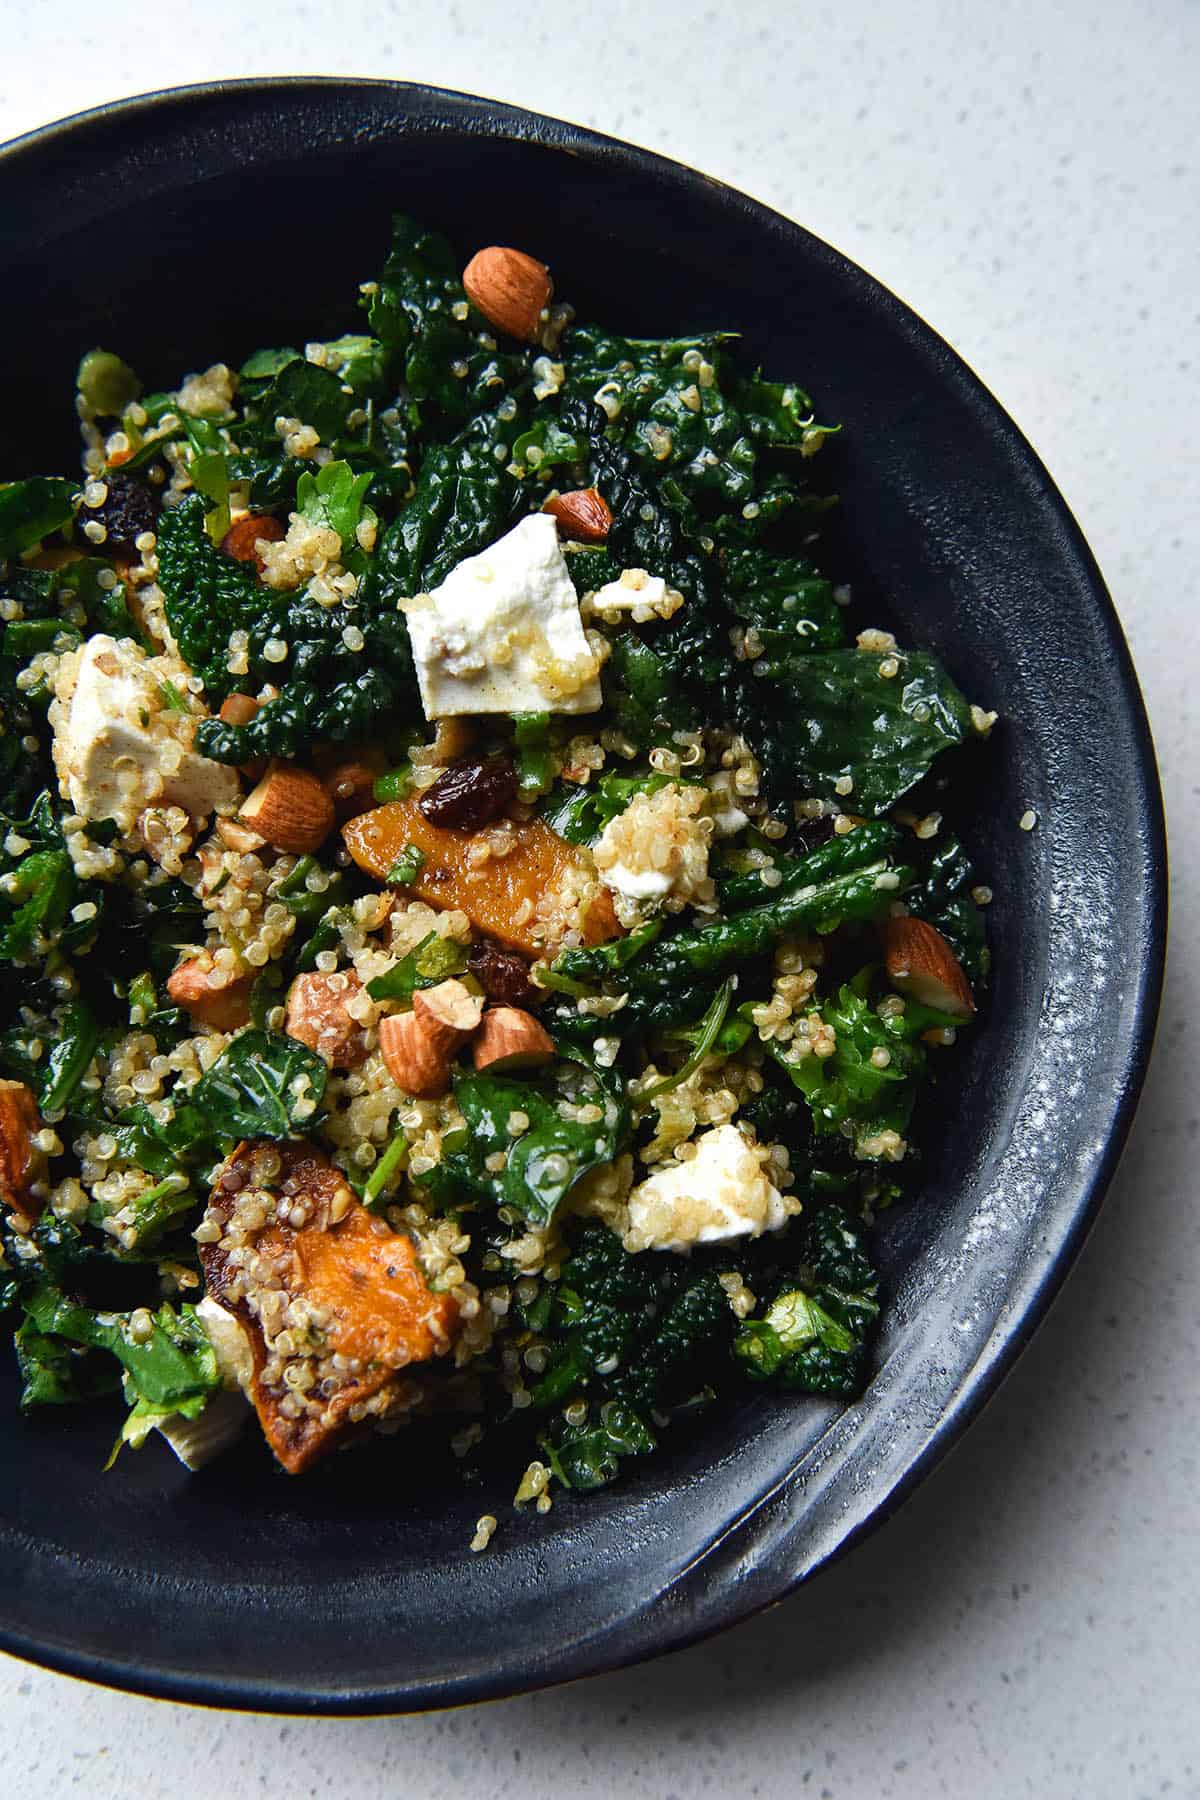 An aerial, close up view of a dark grey ceramic bowl filled with a roasted pumpkin, quinoa, kale, feta, almond and raisin salad. The bowl sits atop a white stone benchtop.